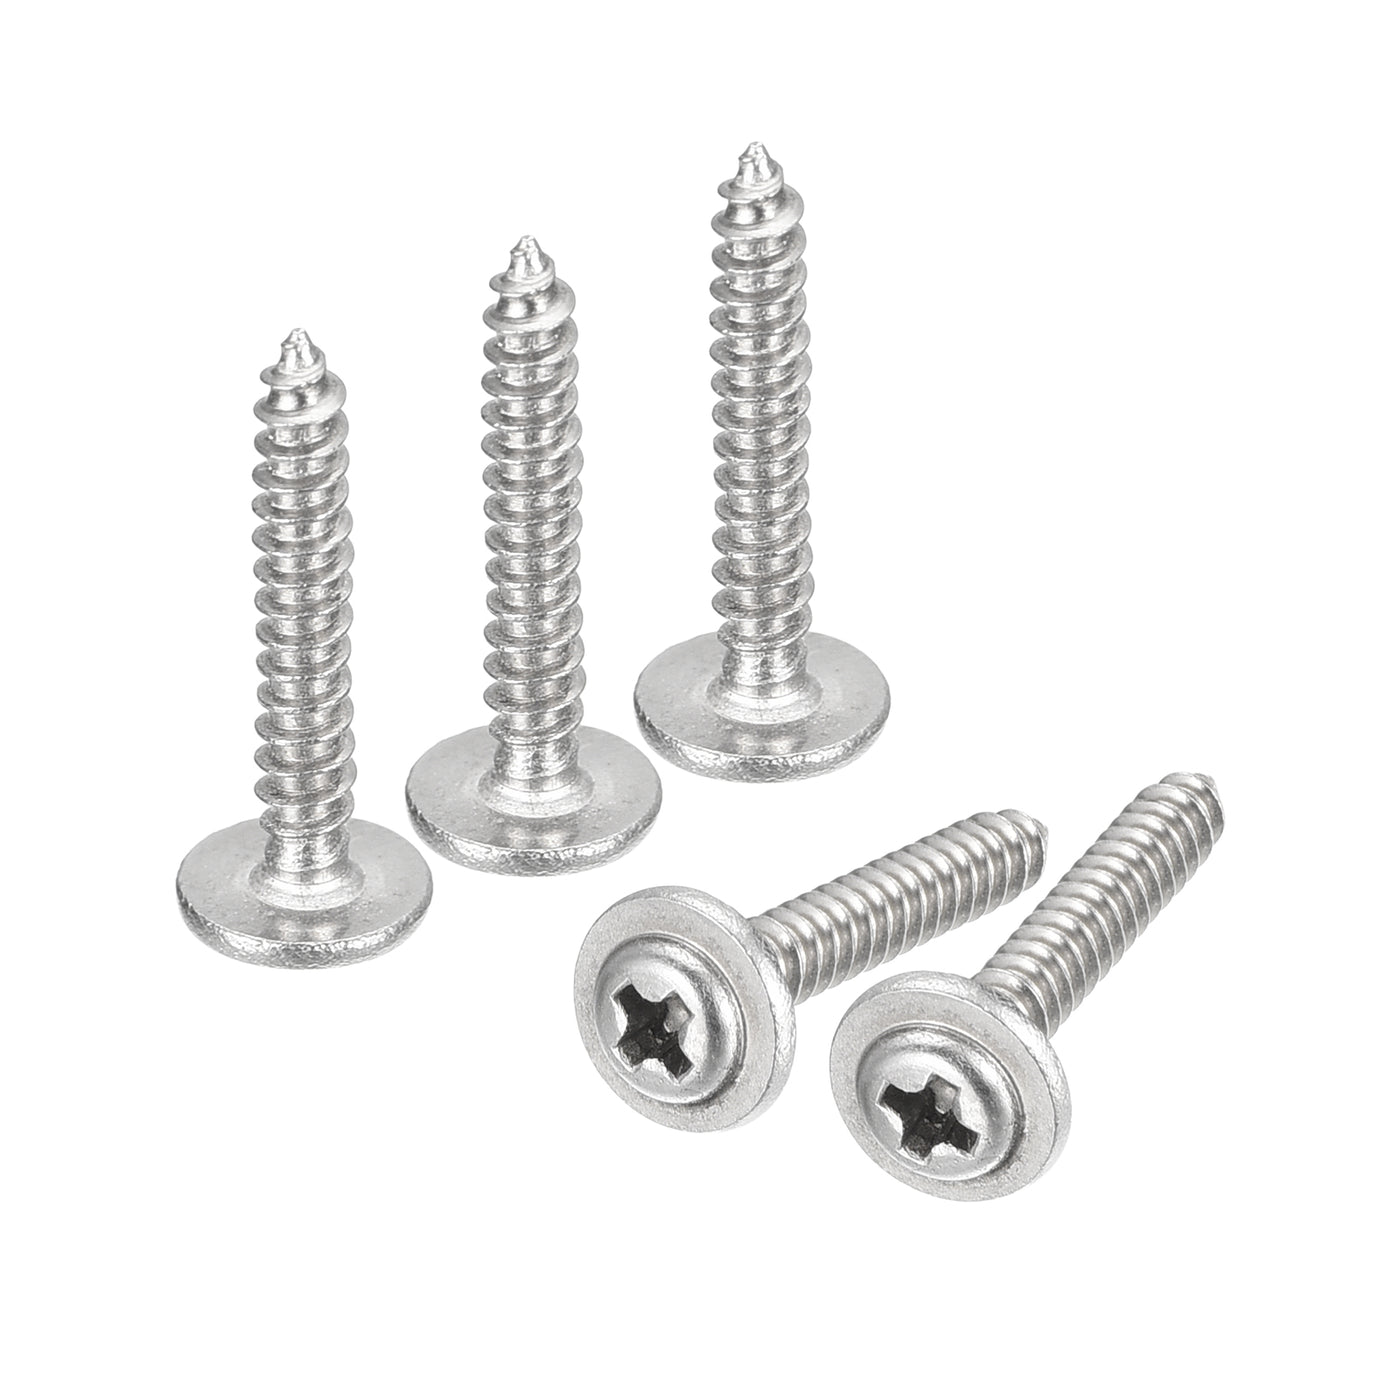 uxcell Uxcell ST2.3x14mm Phillips Pan Head Self-tapping Screw with Washer, 100pcs - 304 Stainless Steel Wood Screw Full Thread (Silver)